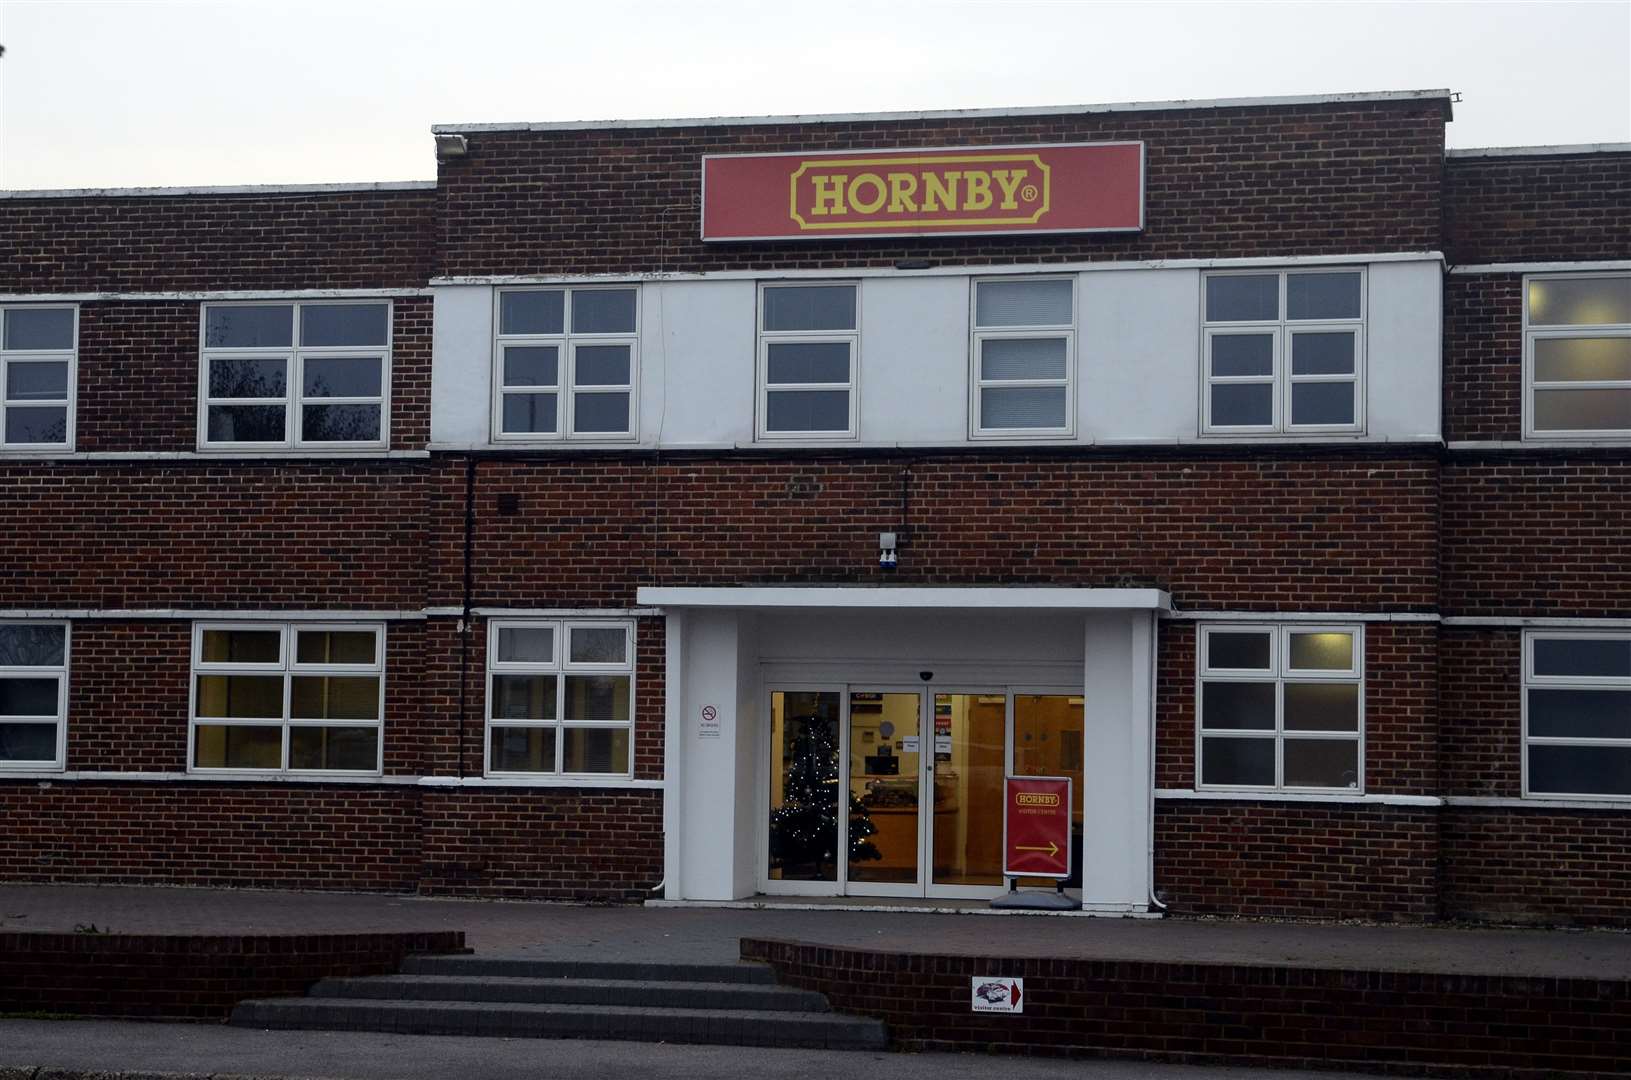 Only the visitor centre remains at Hornby's base in Margate